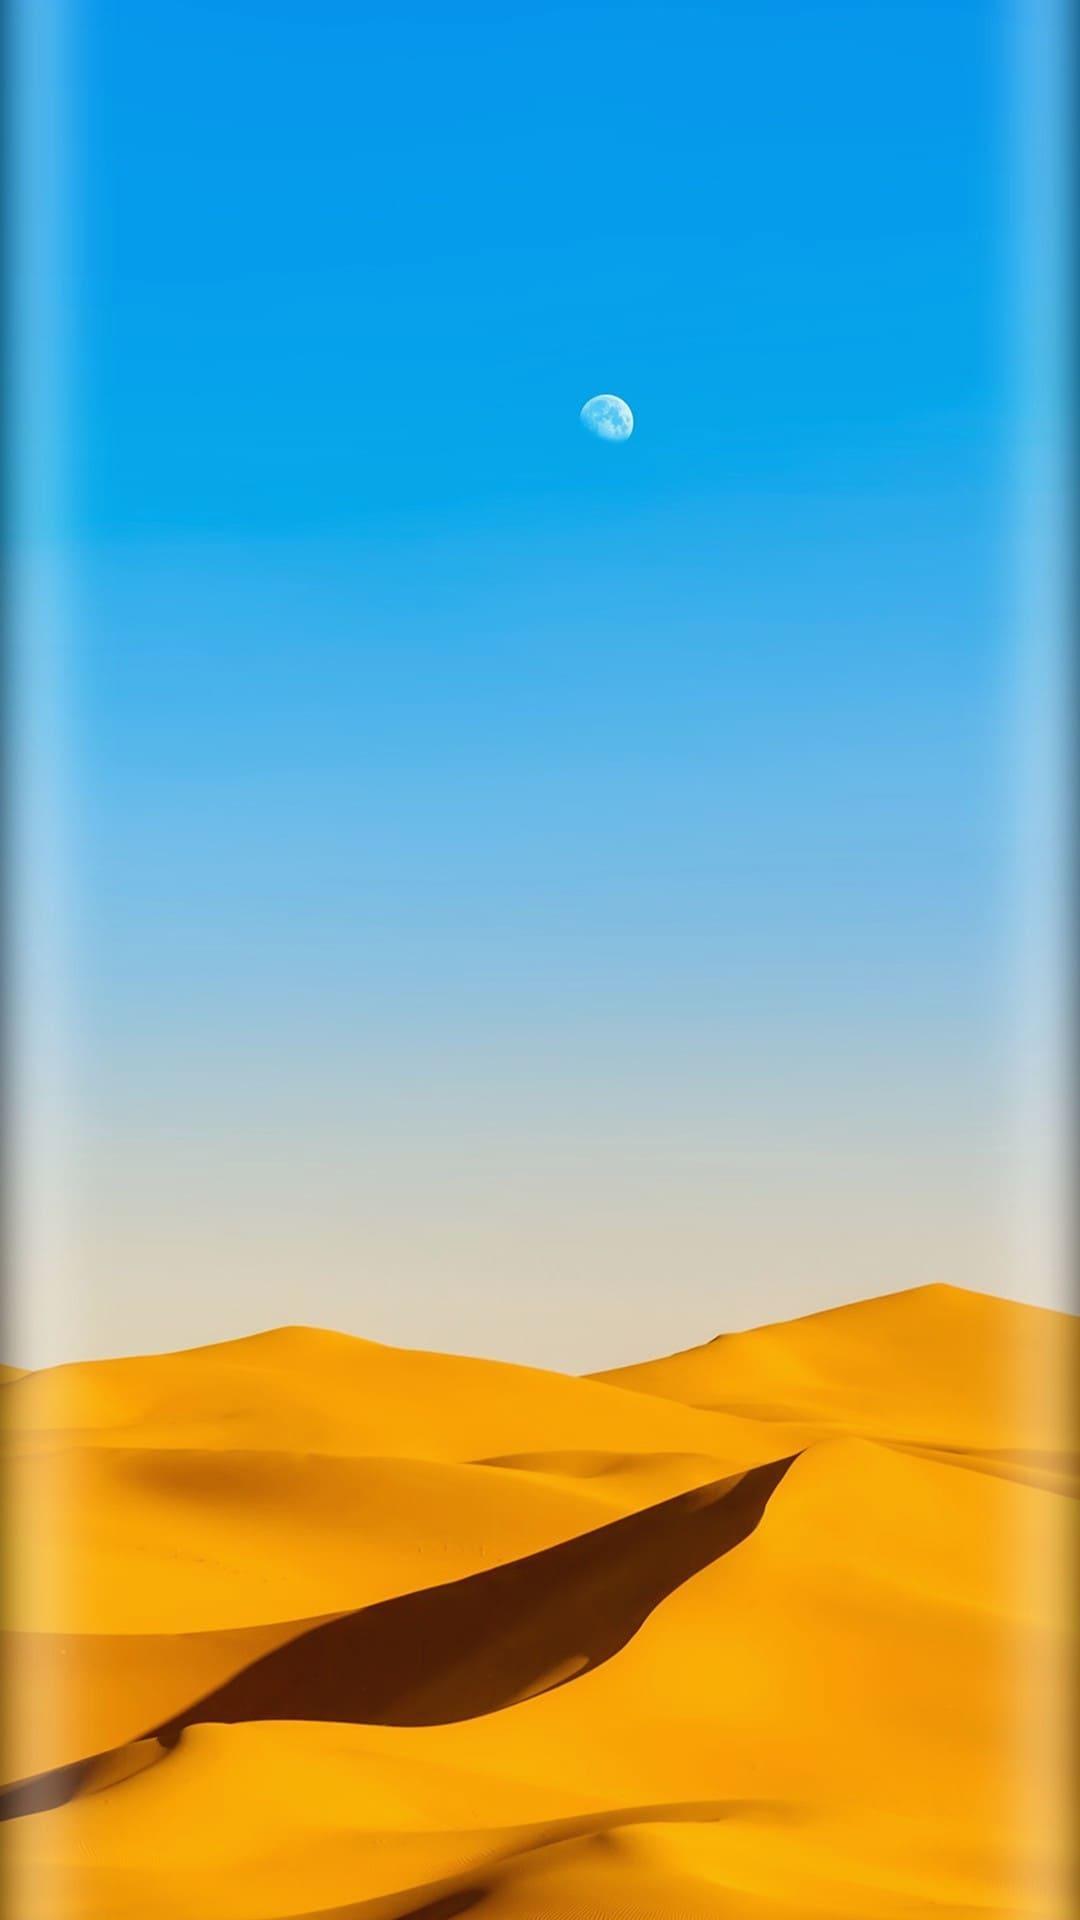 Curved Edge, BorderLight Wallpaper for Android